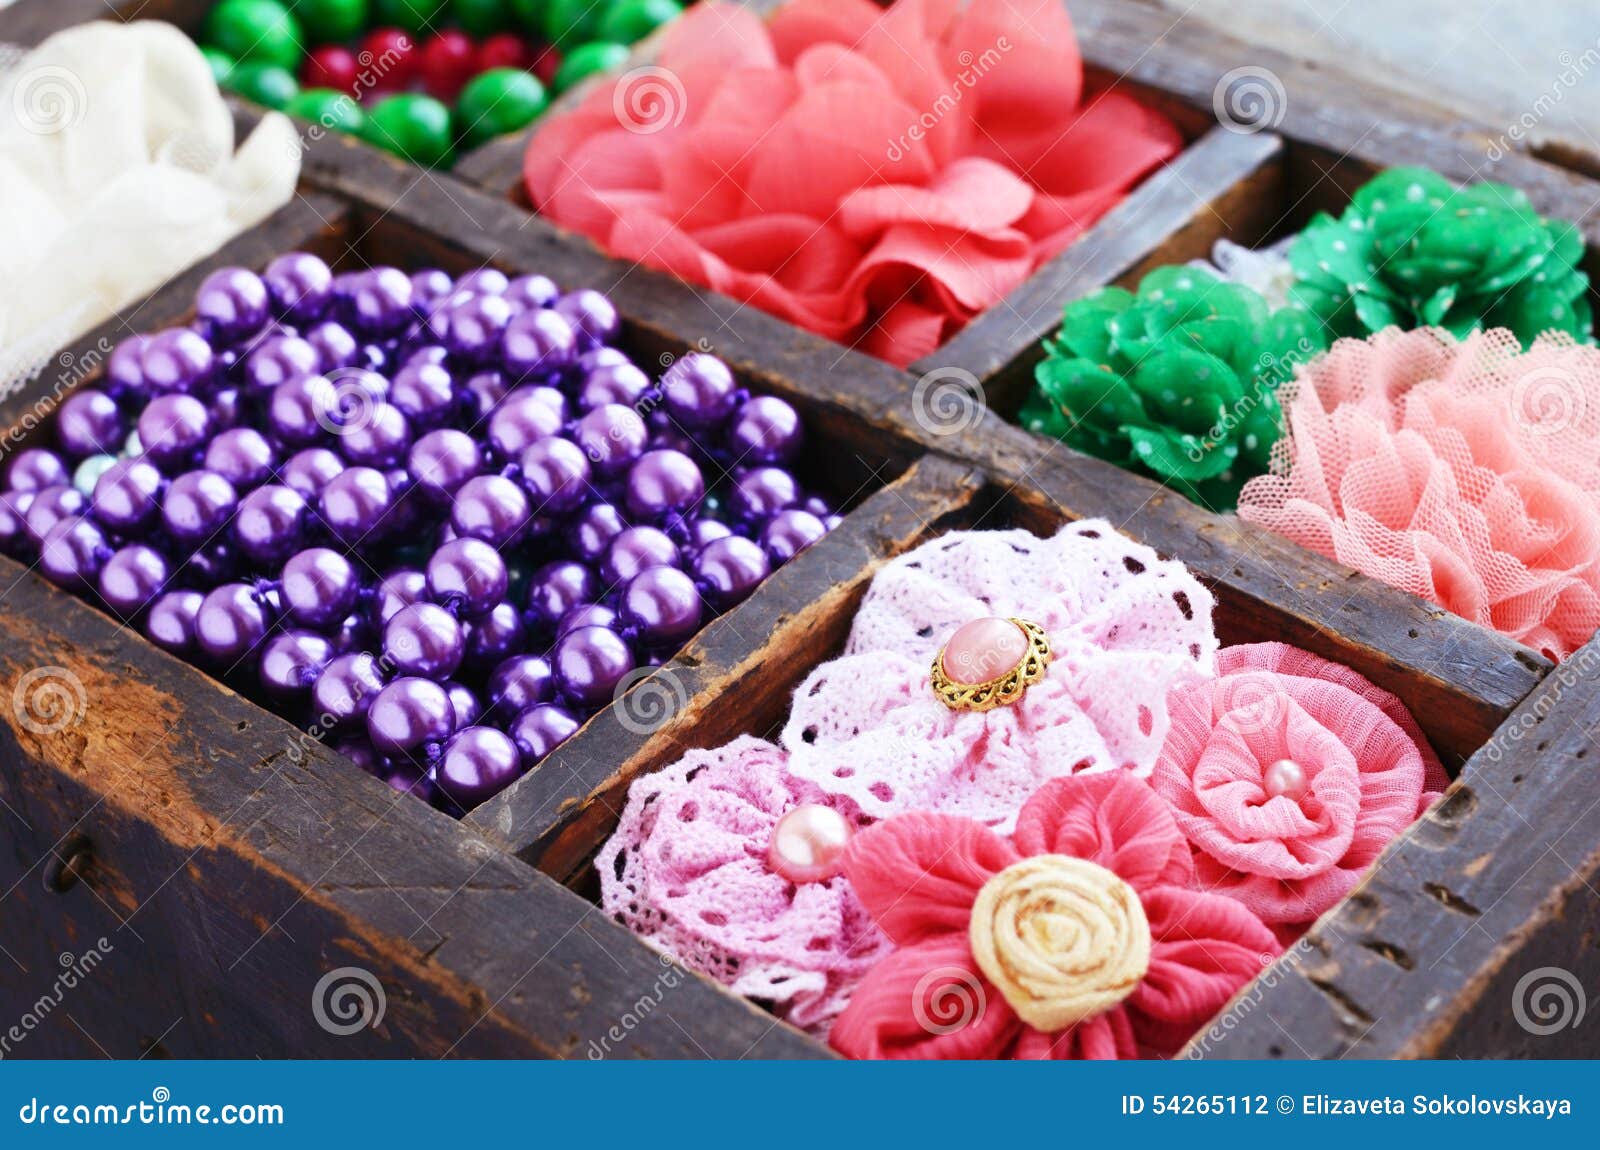 Collection of Colorful Brooches, Beads and Hair Pins Stock Photo ...